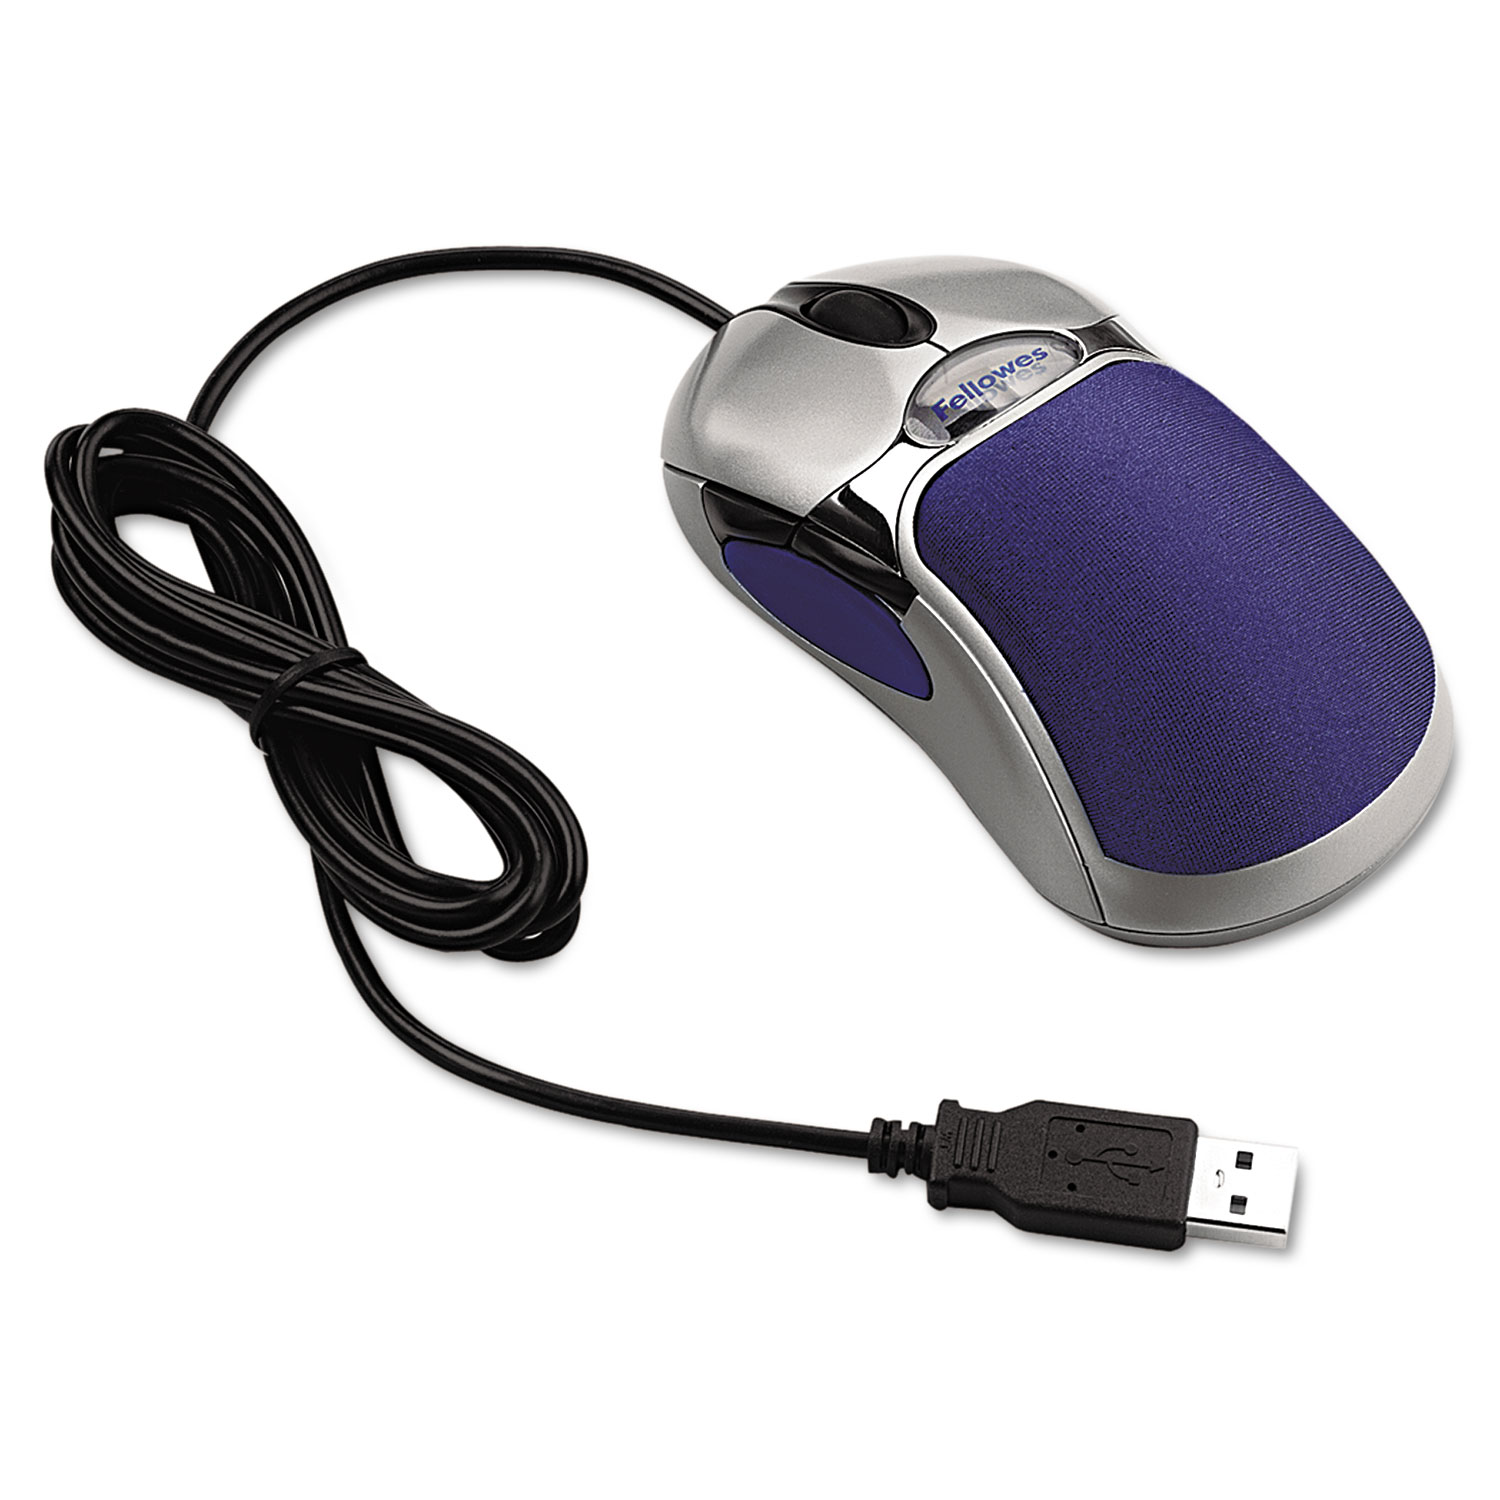  Fellowes 98905 HD Precision Five-Button Optical Gel Mouse, USB 2.0, Left/Right Hand Use, Blue/Silver (FEL98905) 